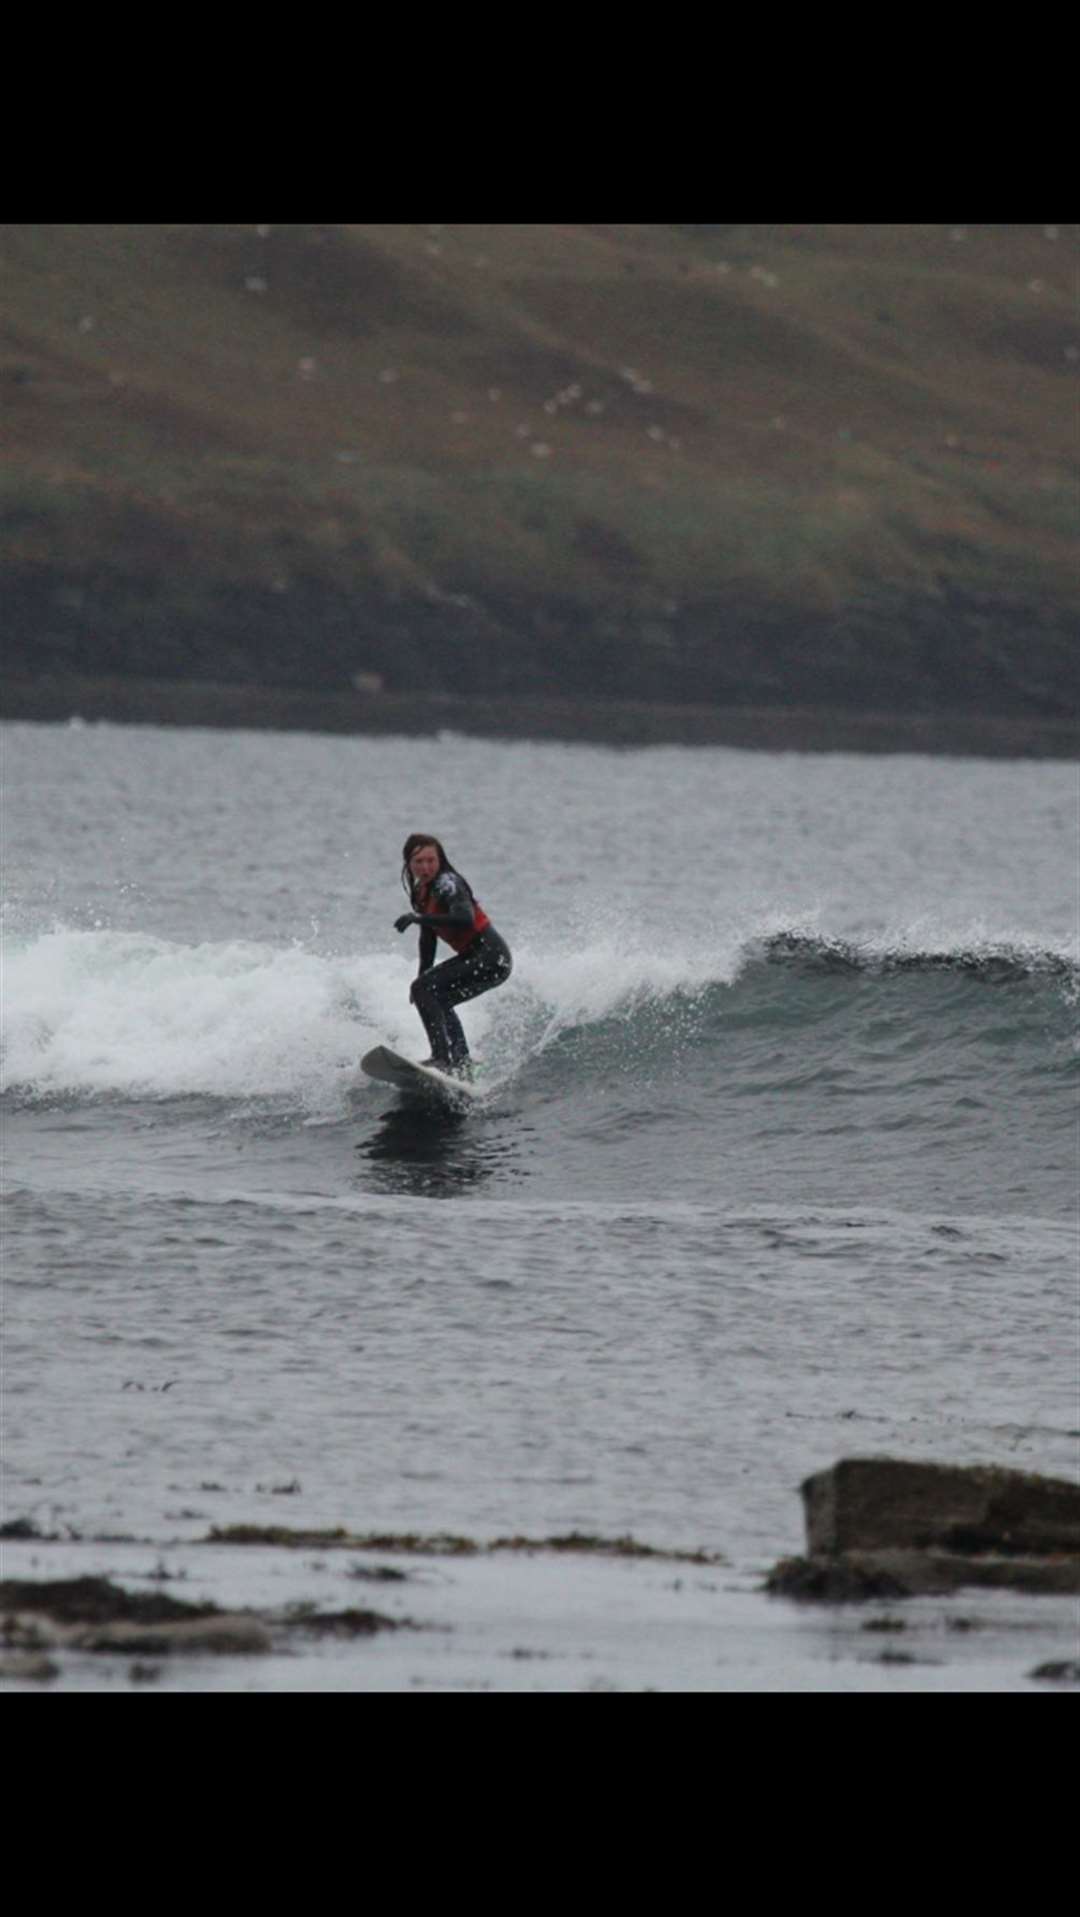 Iona will defend her junior title at the Scottish Surfing Championships in April.